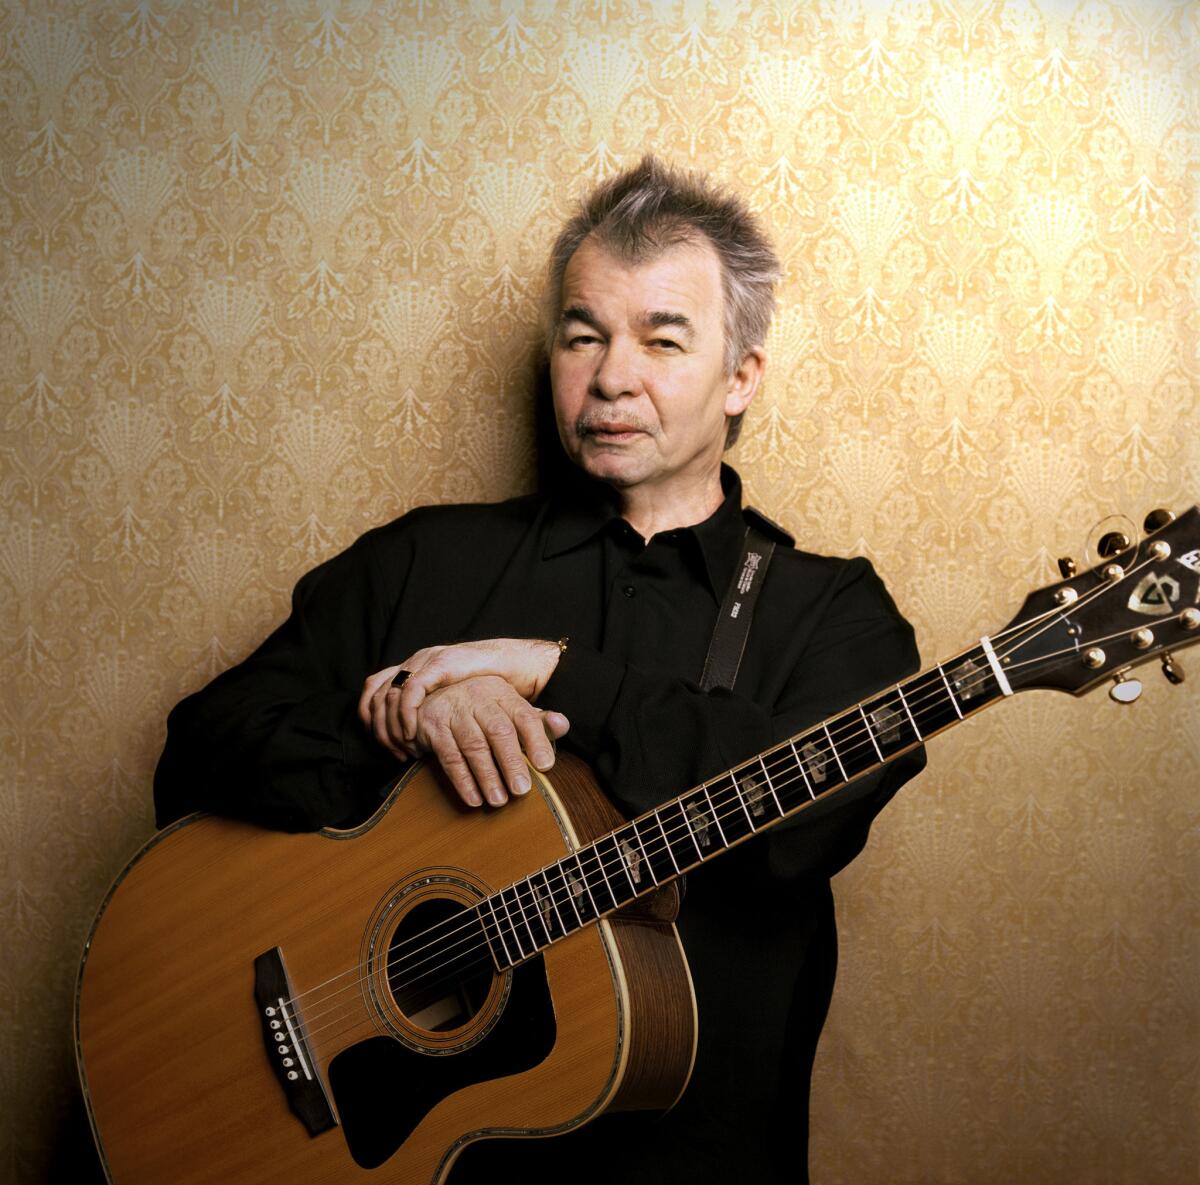 John Prine poses with a guitar strapped around his neck.